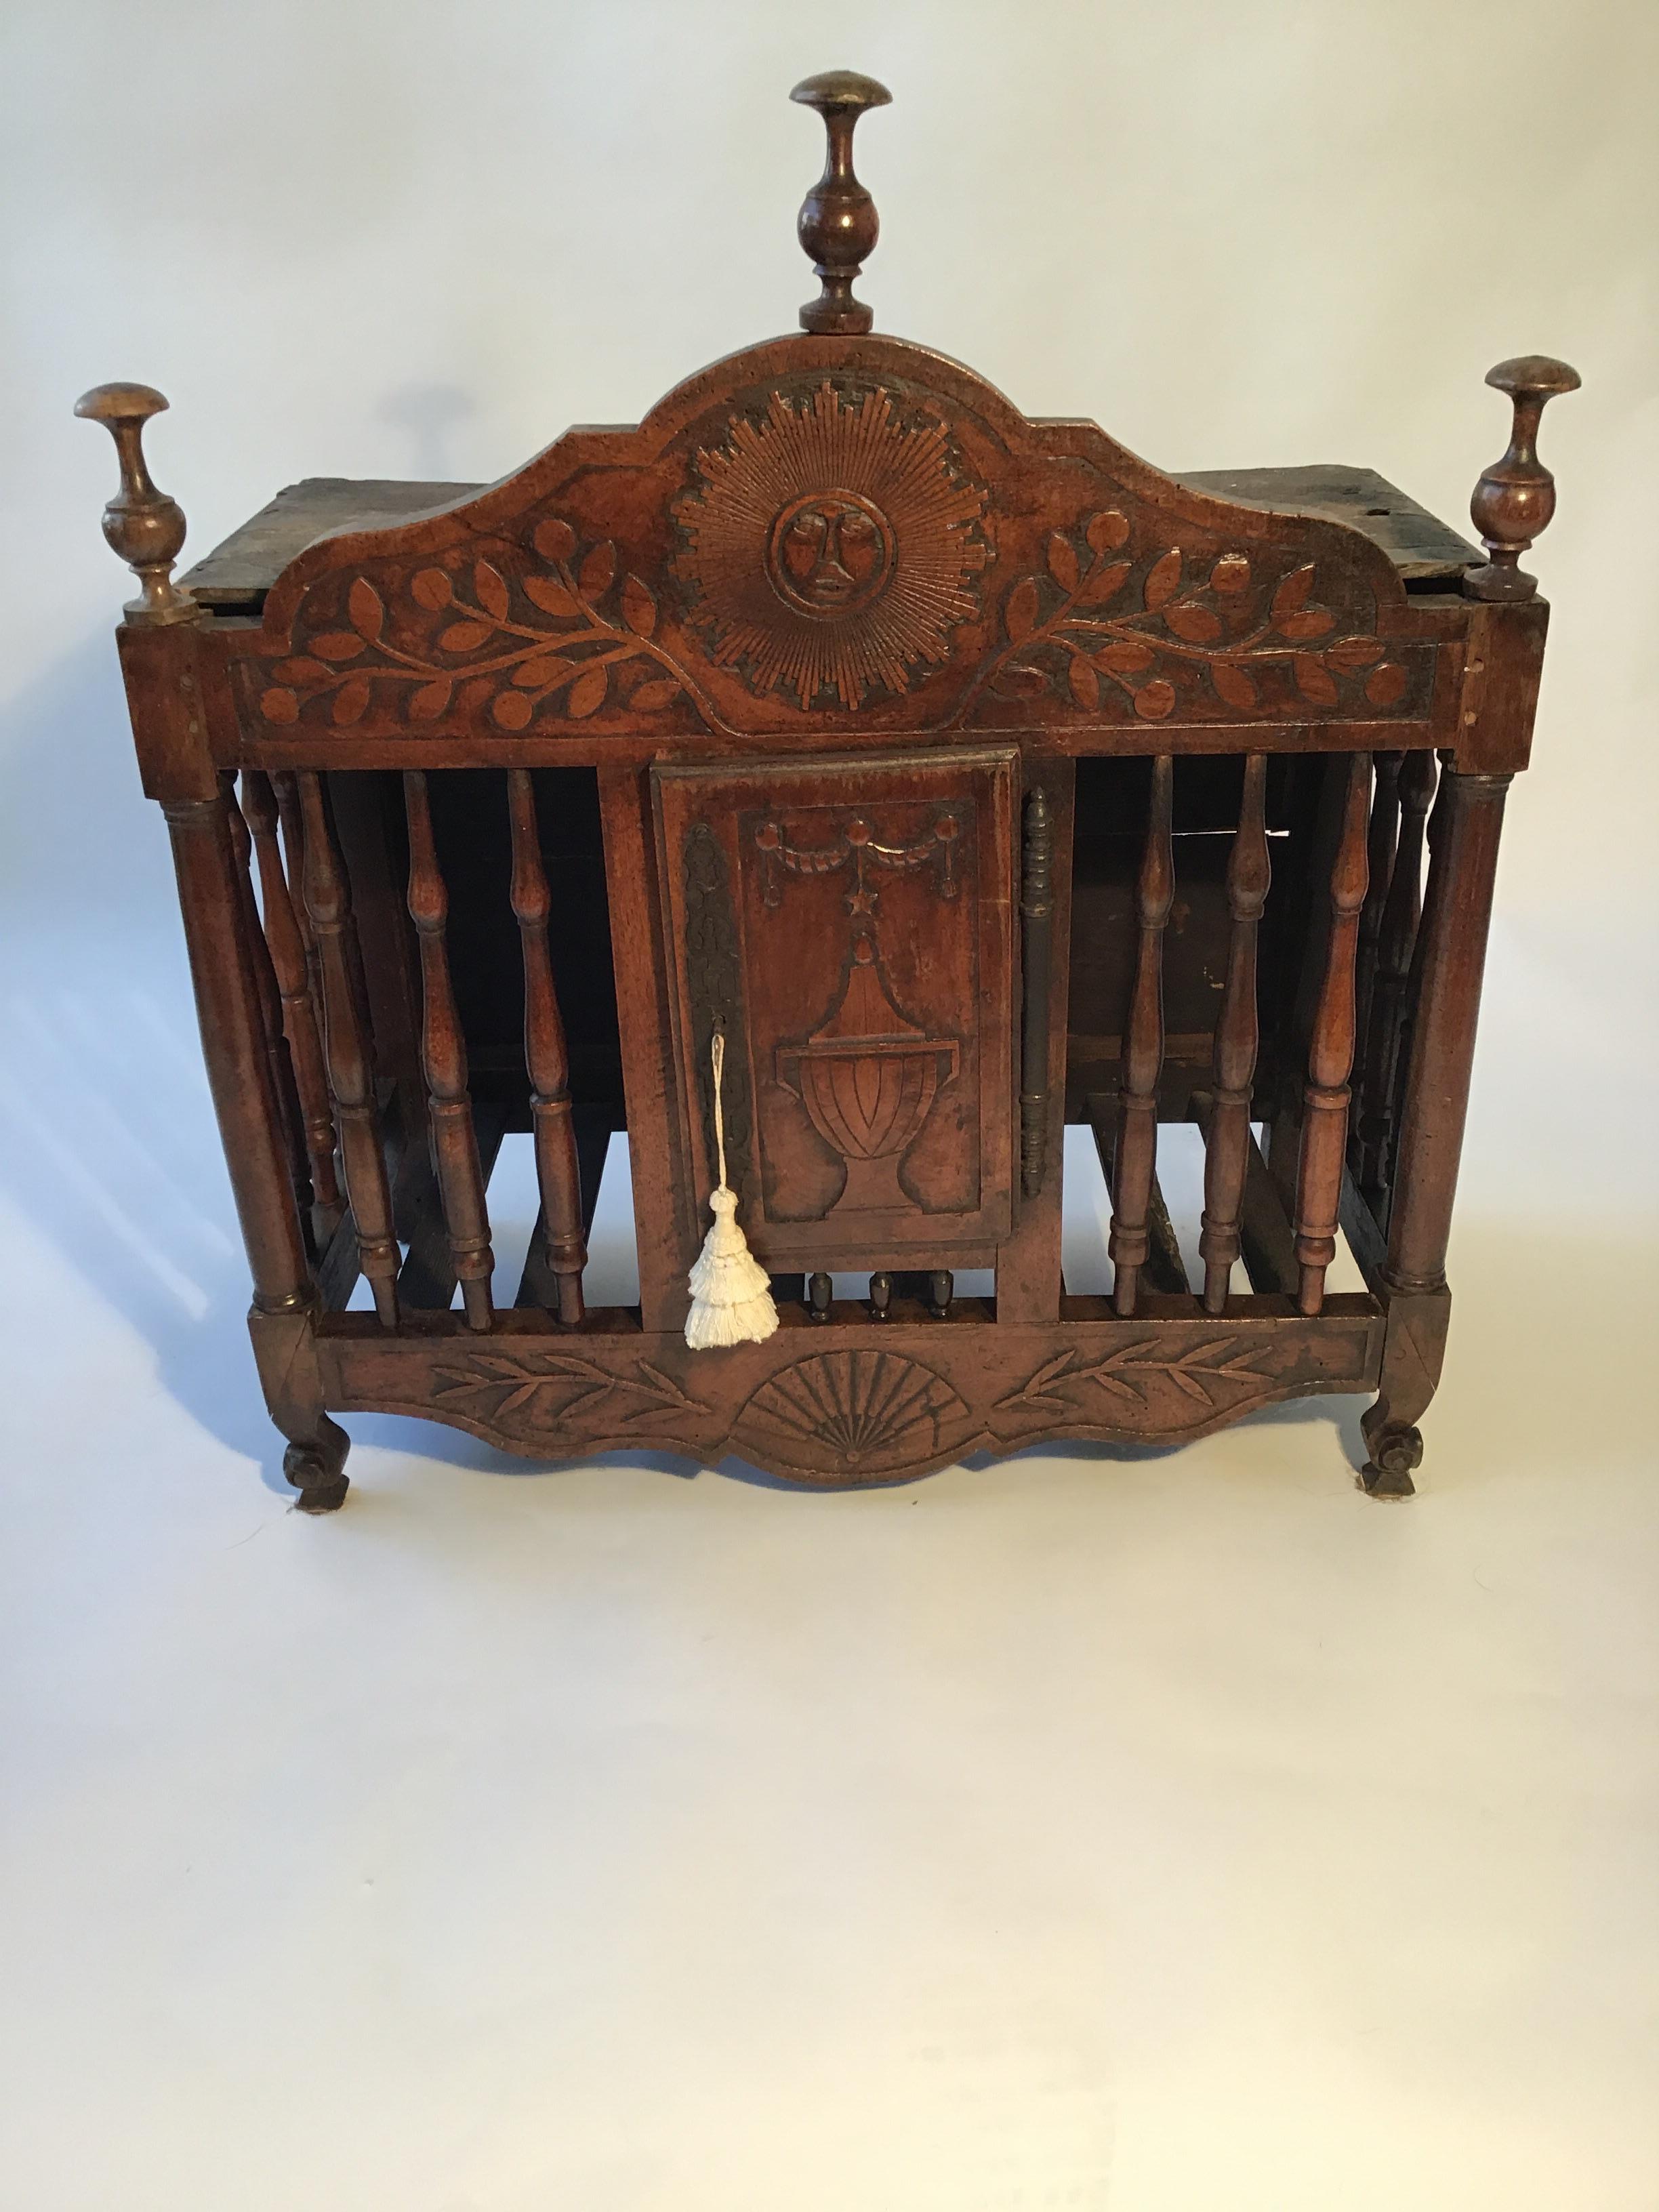 This 18th century hand carved walnut panetiere was created in the finest detail, showing off it’s beautiful face of the sun, and urn door. Originally used to store French Baguettes or long loaves of bread in French manor homes, panetierres were